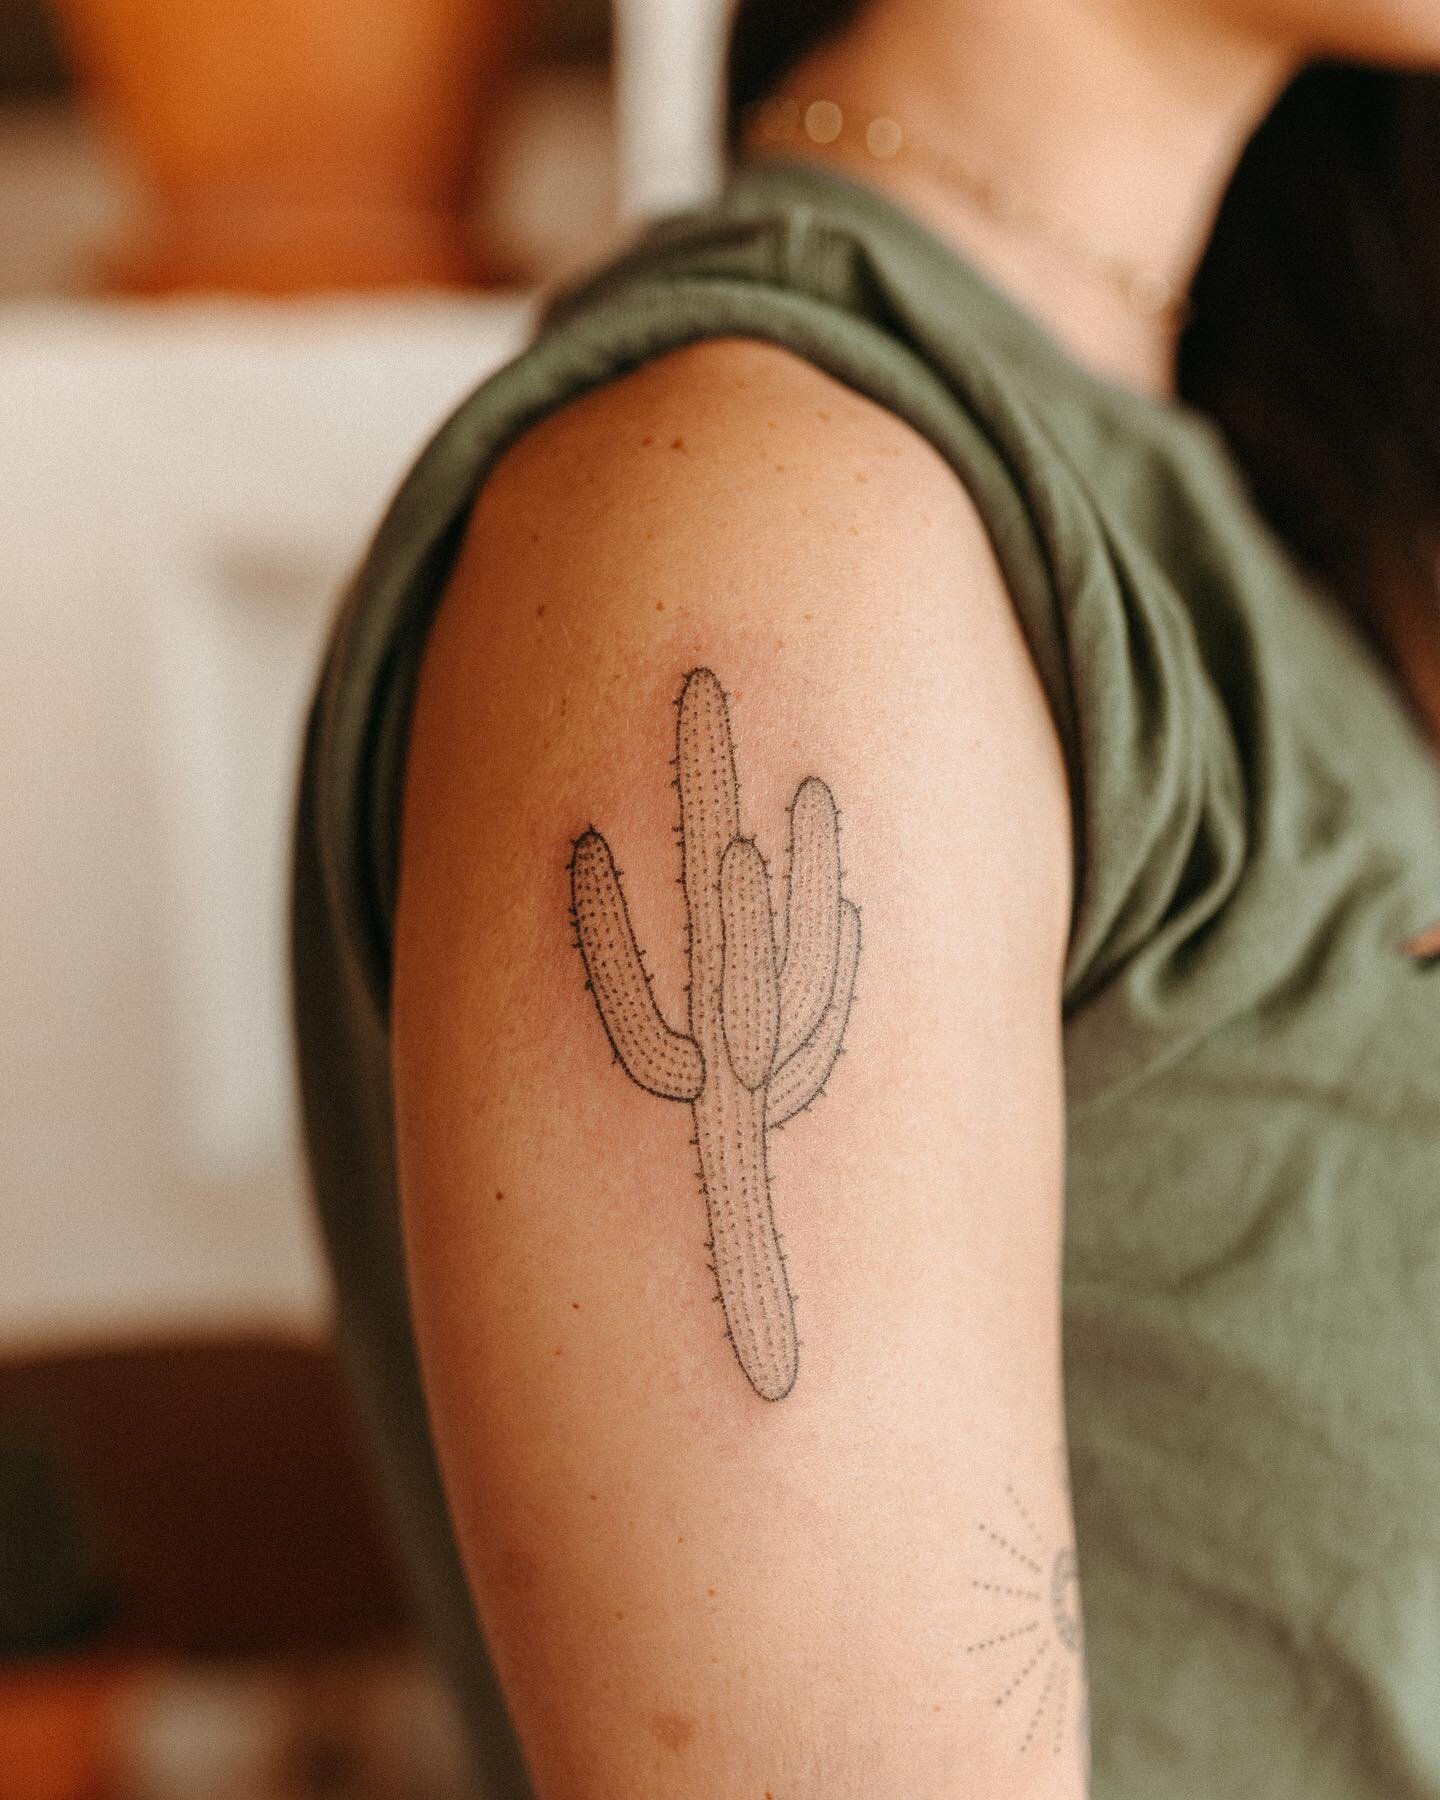 Saguaro cactus by @spicy_pokes 🌵✨